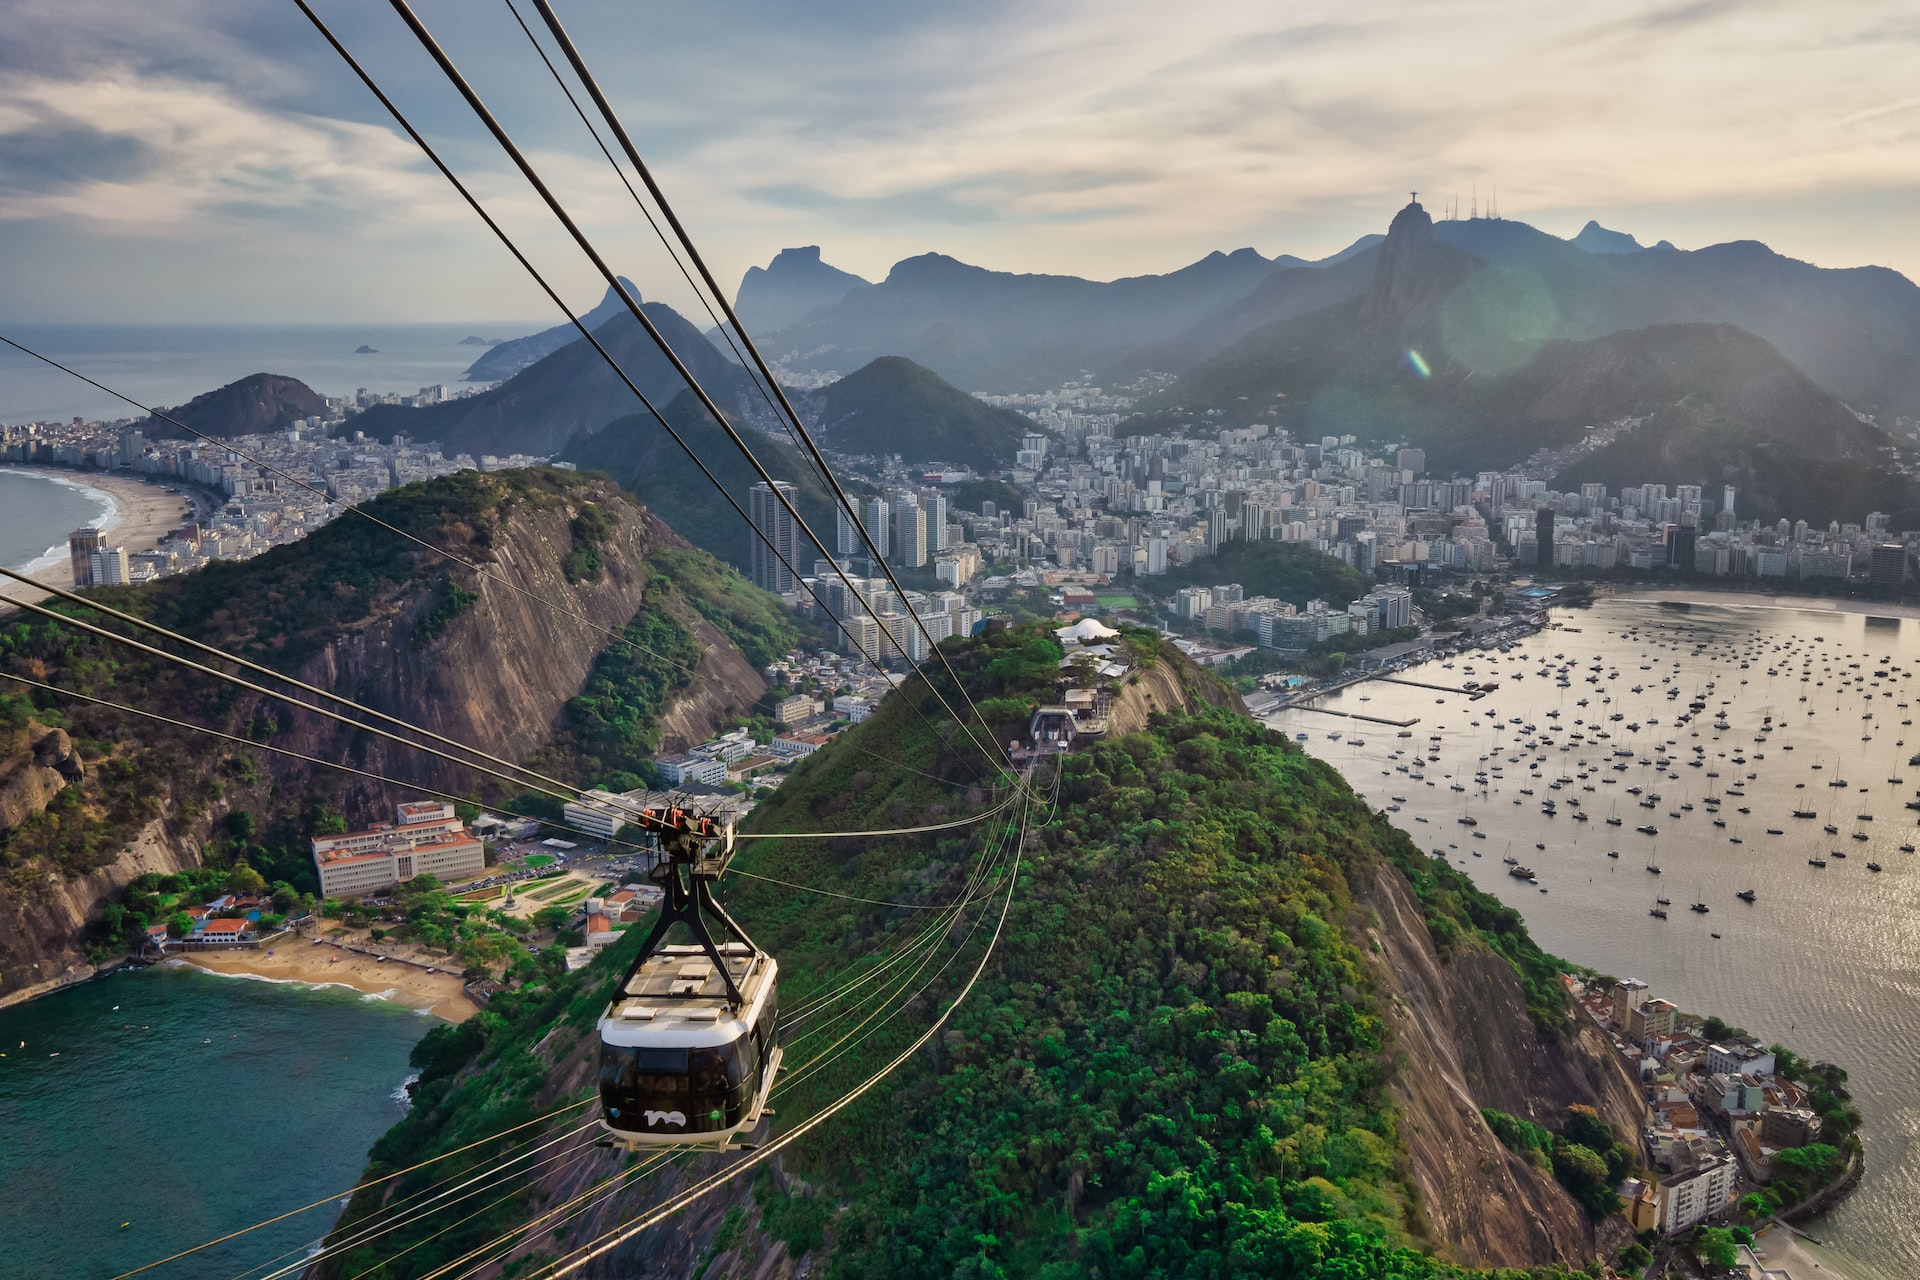 hop on a cable car in rio de janeiro for an awesome thing to do in rio